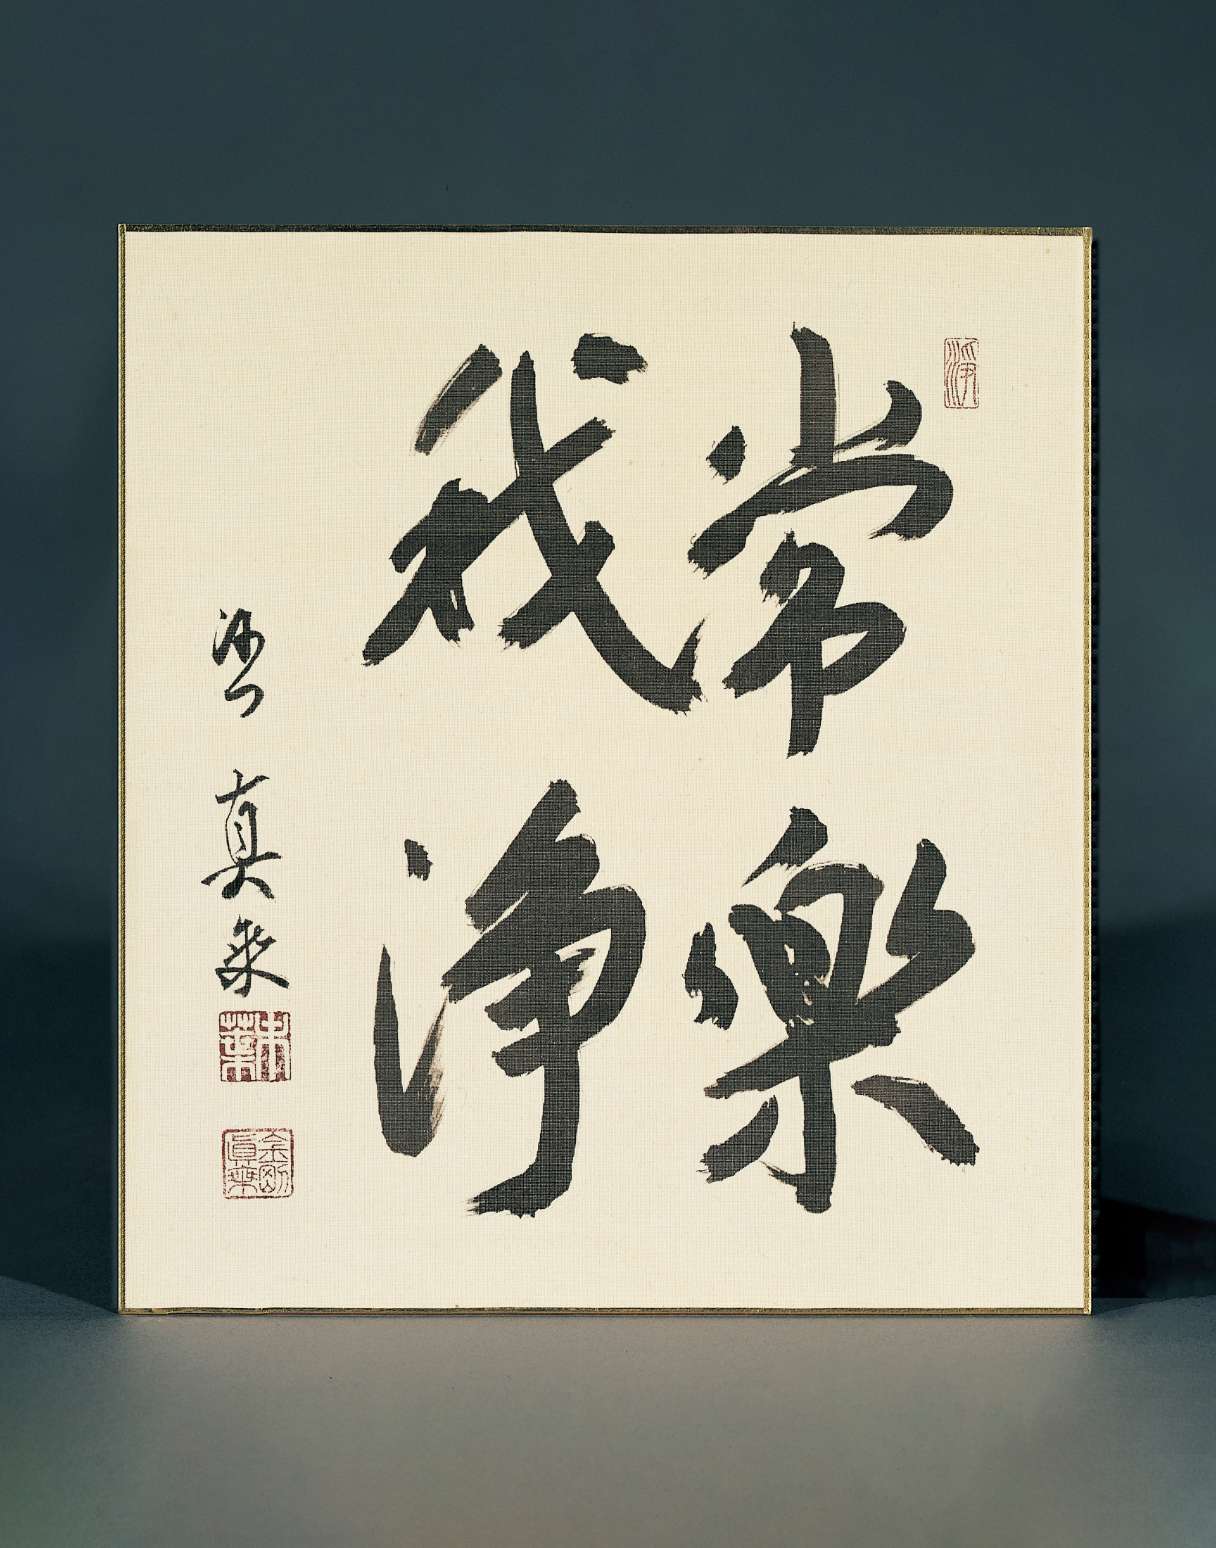 Four large Japanese calligraphy characters are written with brush on a squat, rectangular sheet of paper; to the left another smaller line of calligraphy is written with two stamp impressions in black.